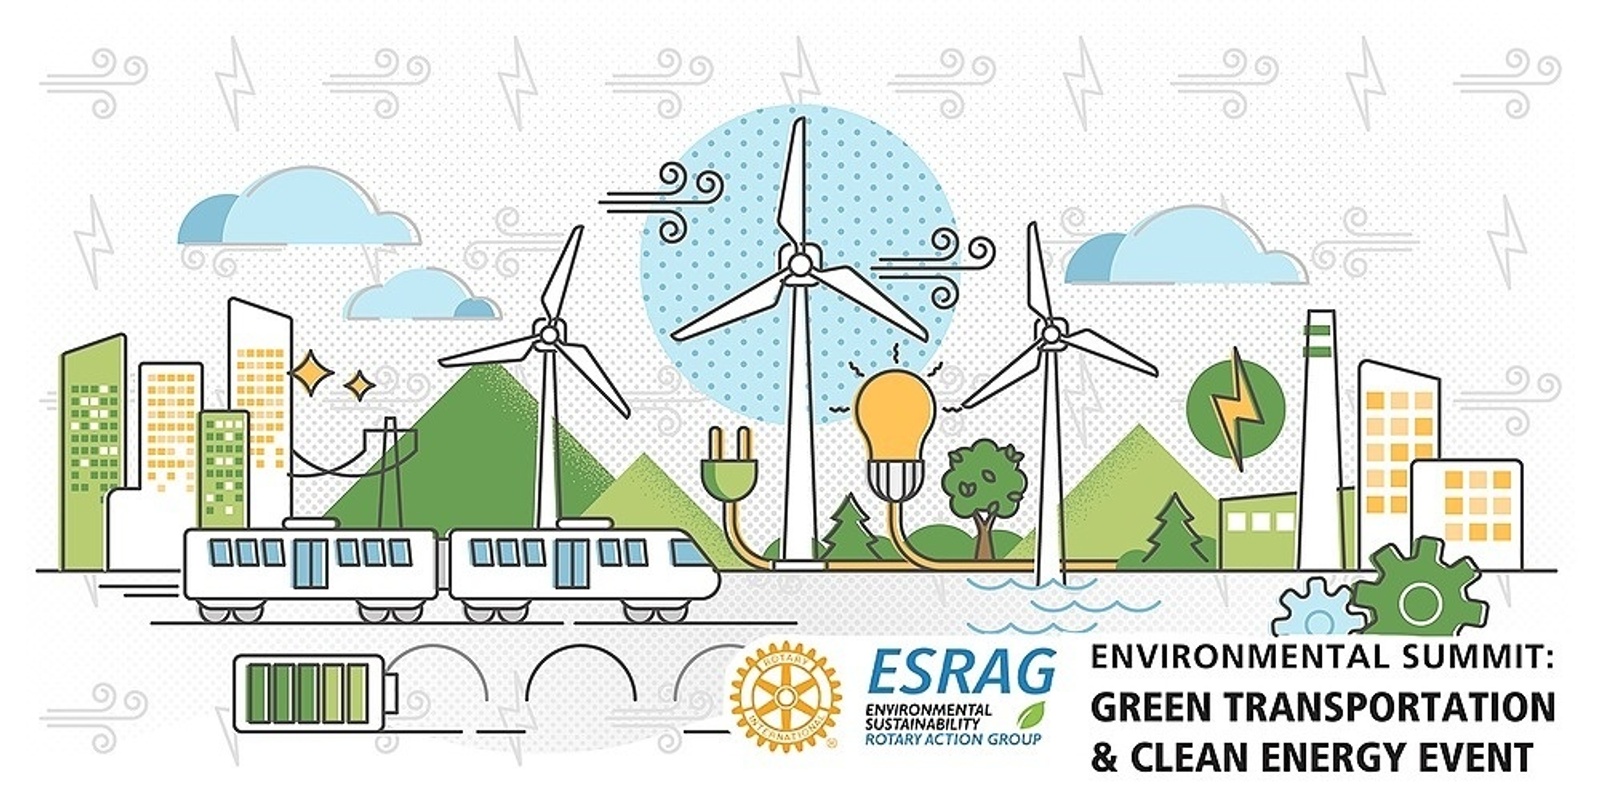 Banner image for Rotary's Environmental Summit on Green Transportation & Clean Energy